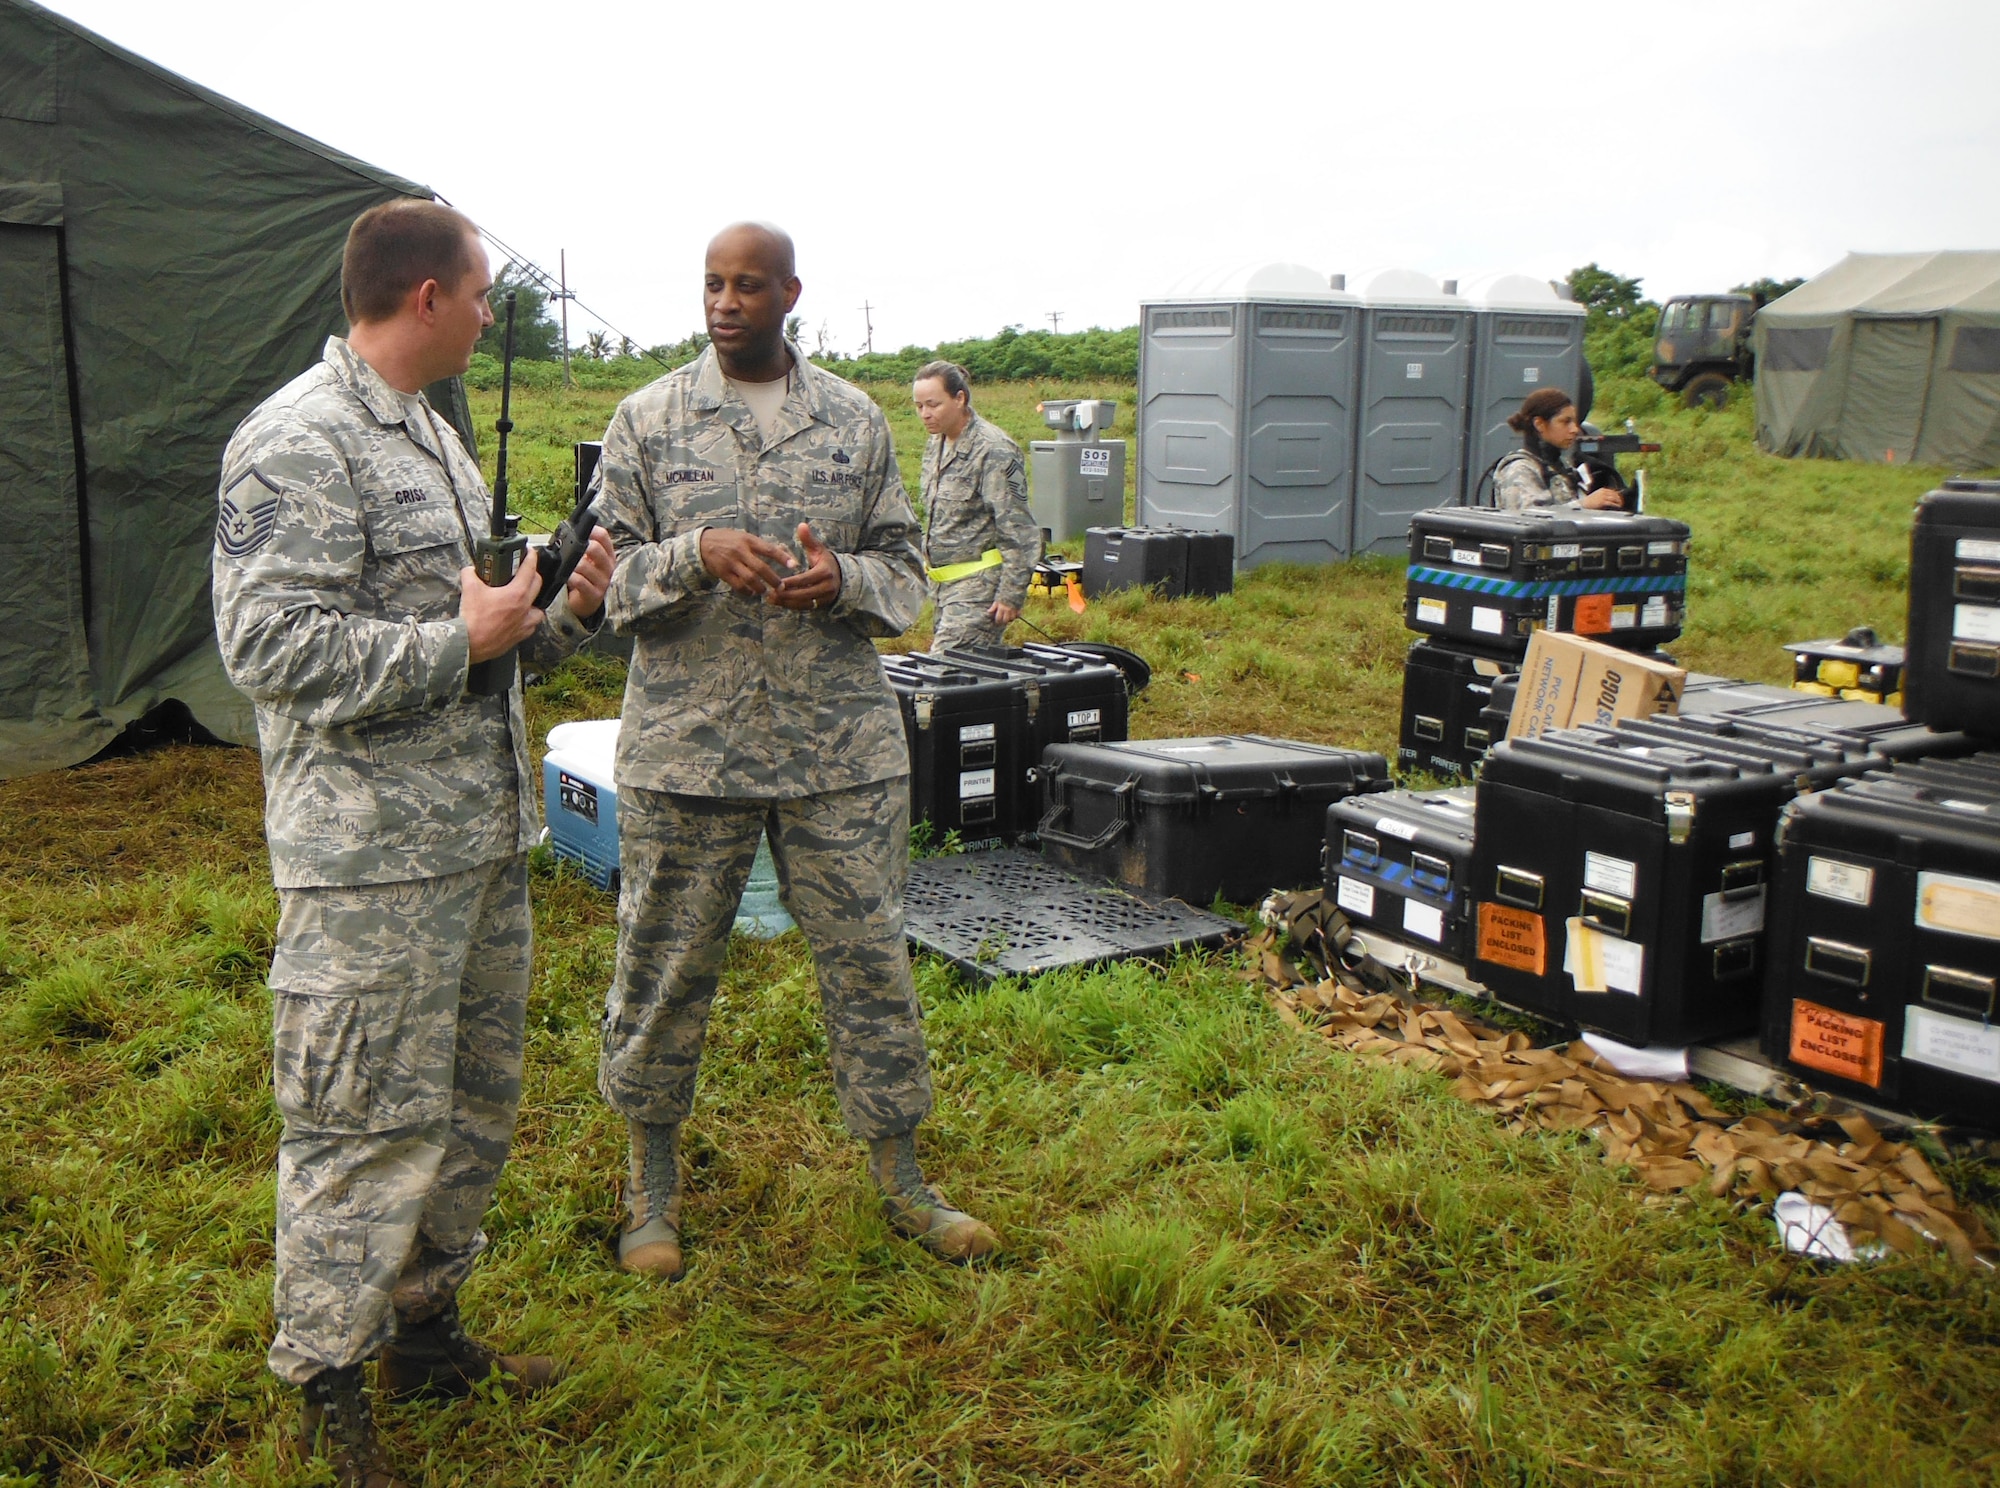 Master Sgt. Joshua Criss, 644th Combat Communications Squadron wing inspection team lead, and Chief Master Sgt. Michael McMillan, 36th Wing command chief, discuss training tactics and procedures during an exercise Oct. 28, 2014, at Andersen South, Guam. The exercise allowed Airmen from the 644th CBCS to exercise their abilities to respond to various scenarios during contingency operations. (U.S. Air Force courtesy photo/Released)